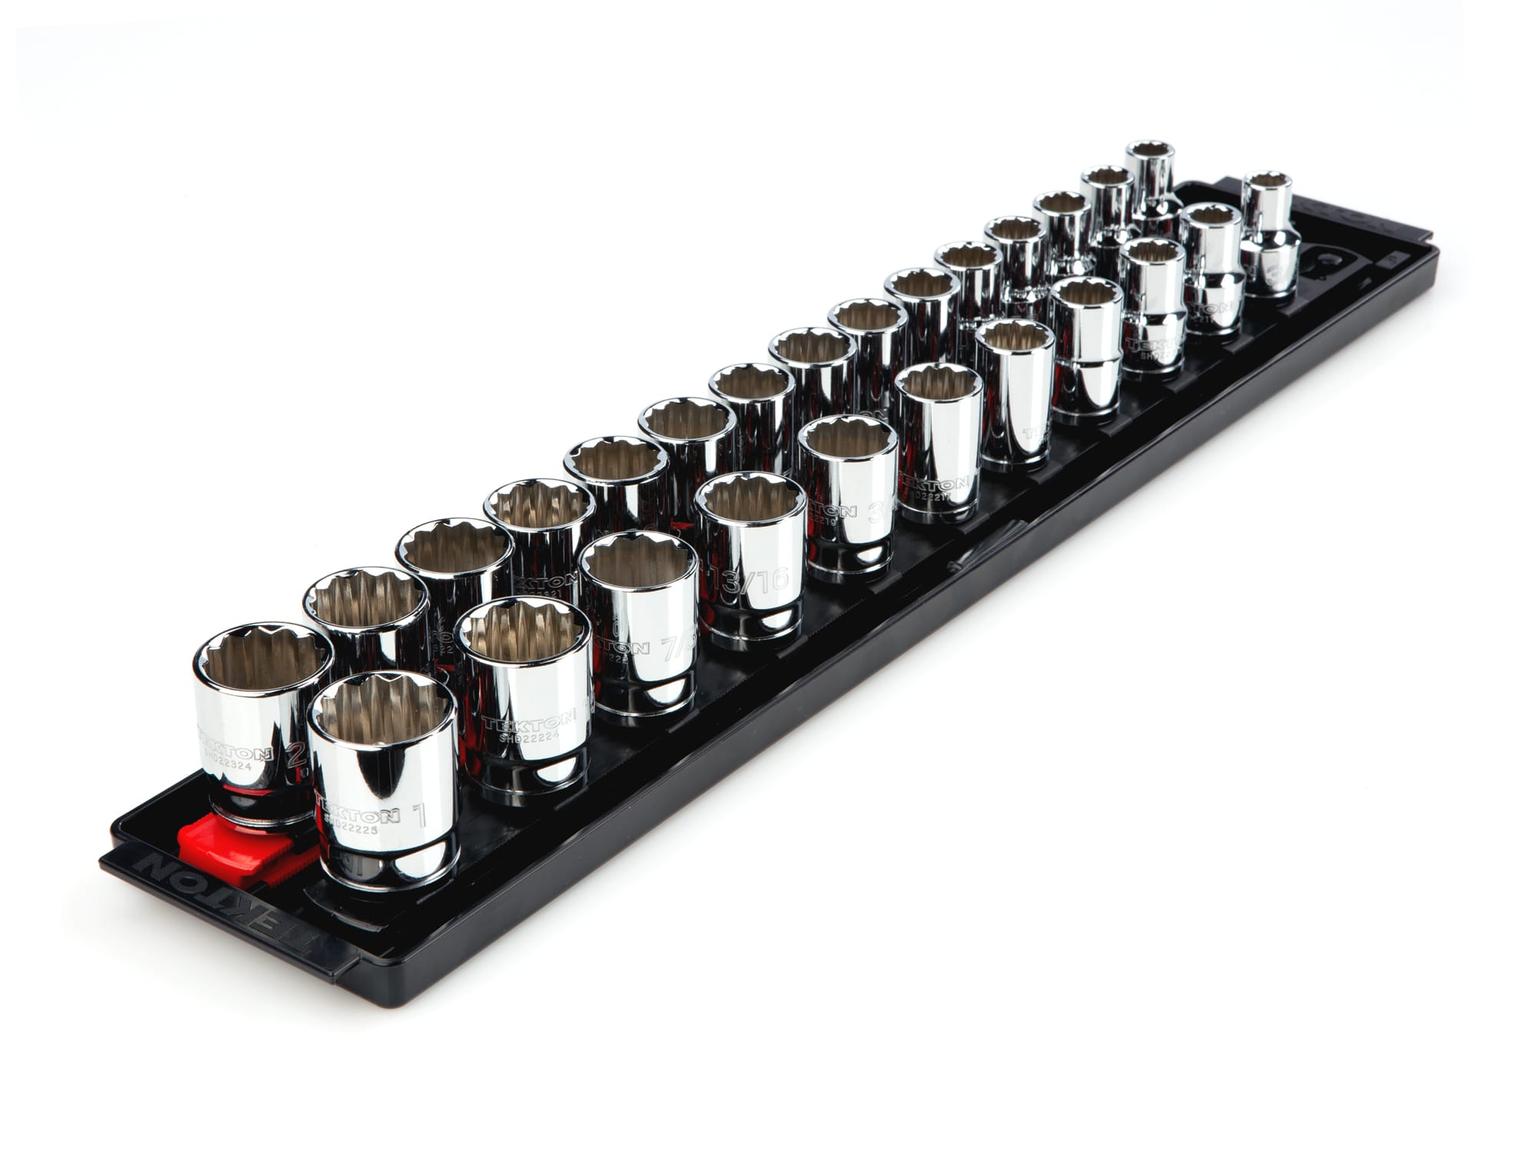 TEKTON SHD92202-T 1/2 Inch Drive 12-Point Socket Set, 26-Piece (3/8-1 in., 10-24 mm) with Rails